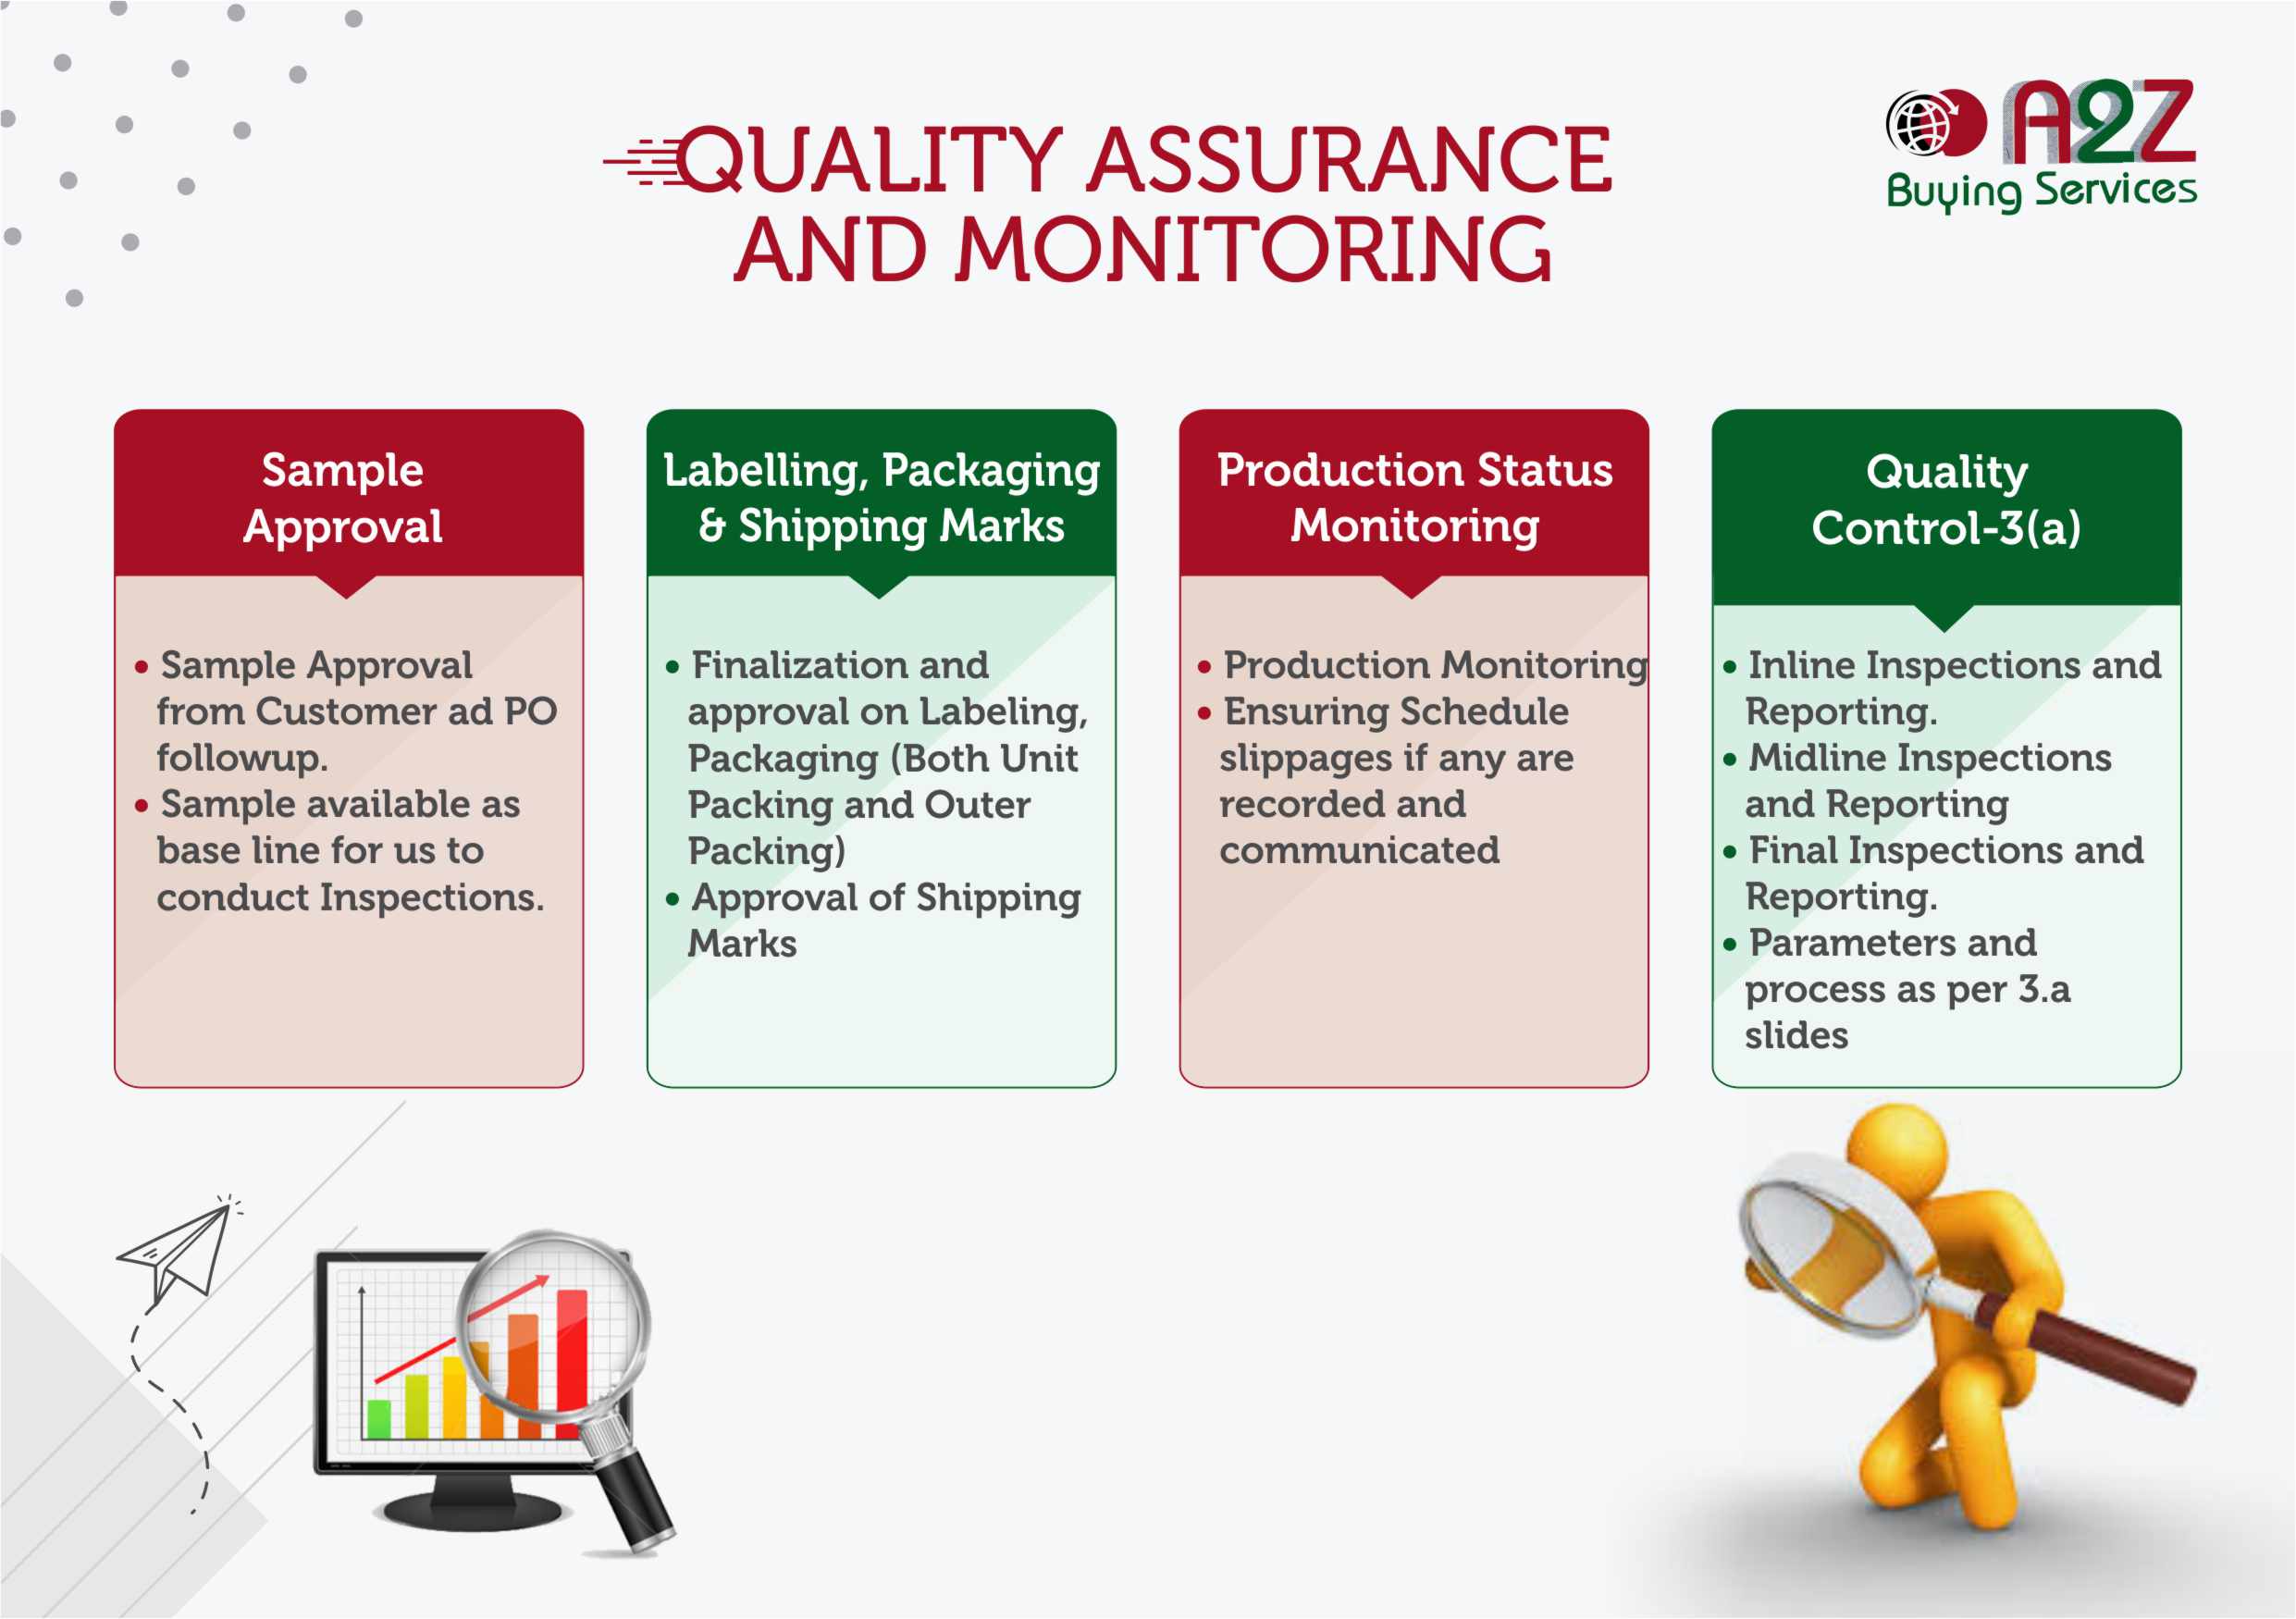 Quality Assurance Services in Gurgaon